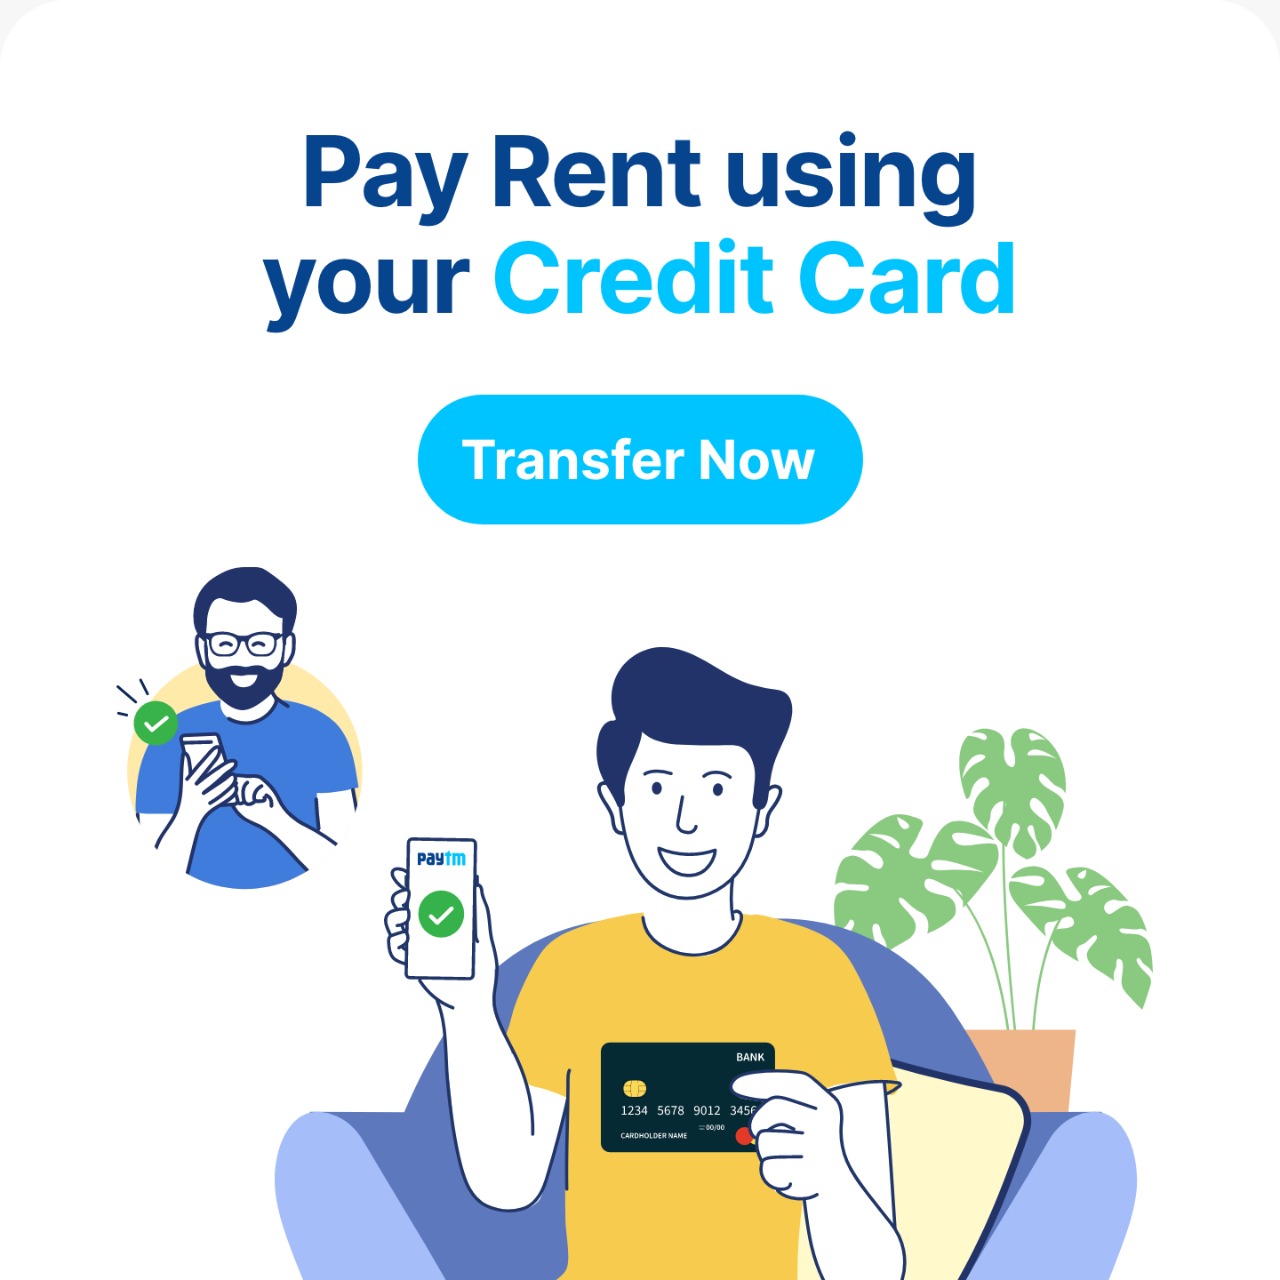 Paytm expands Rent Payments service from home to shop rentals, announces assured cashback of upto Rs 10,000 decoding=